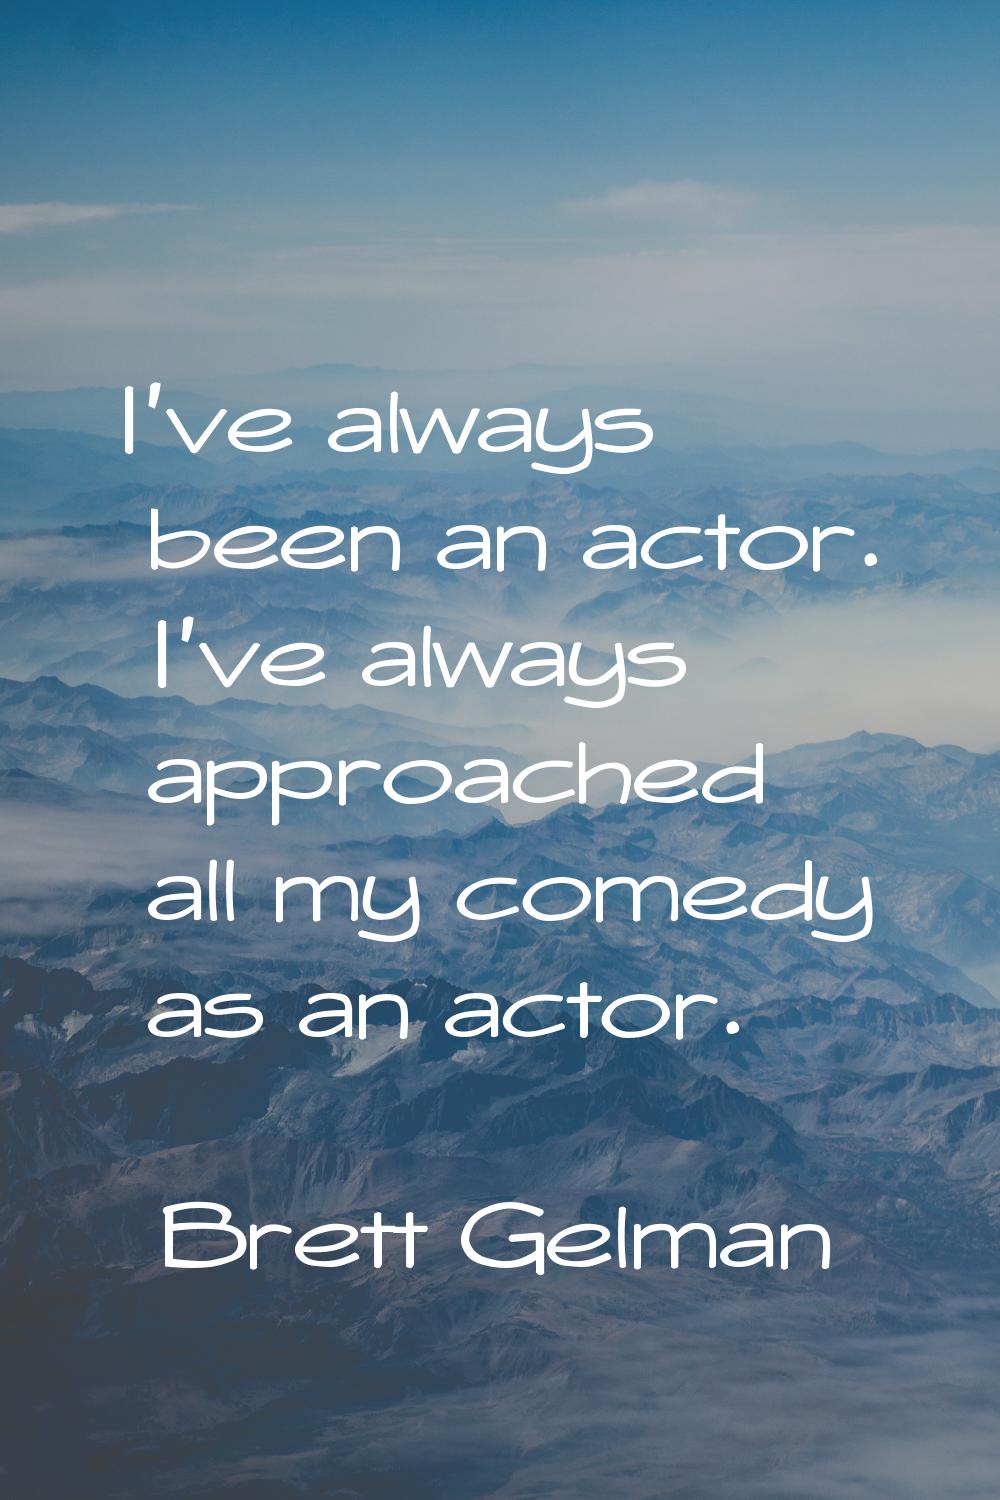 I've always been an actor. I've always approached all my comedy as an actor.